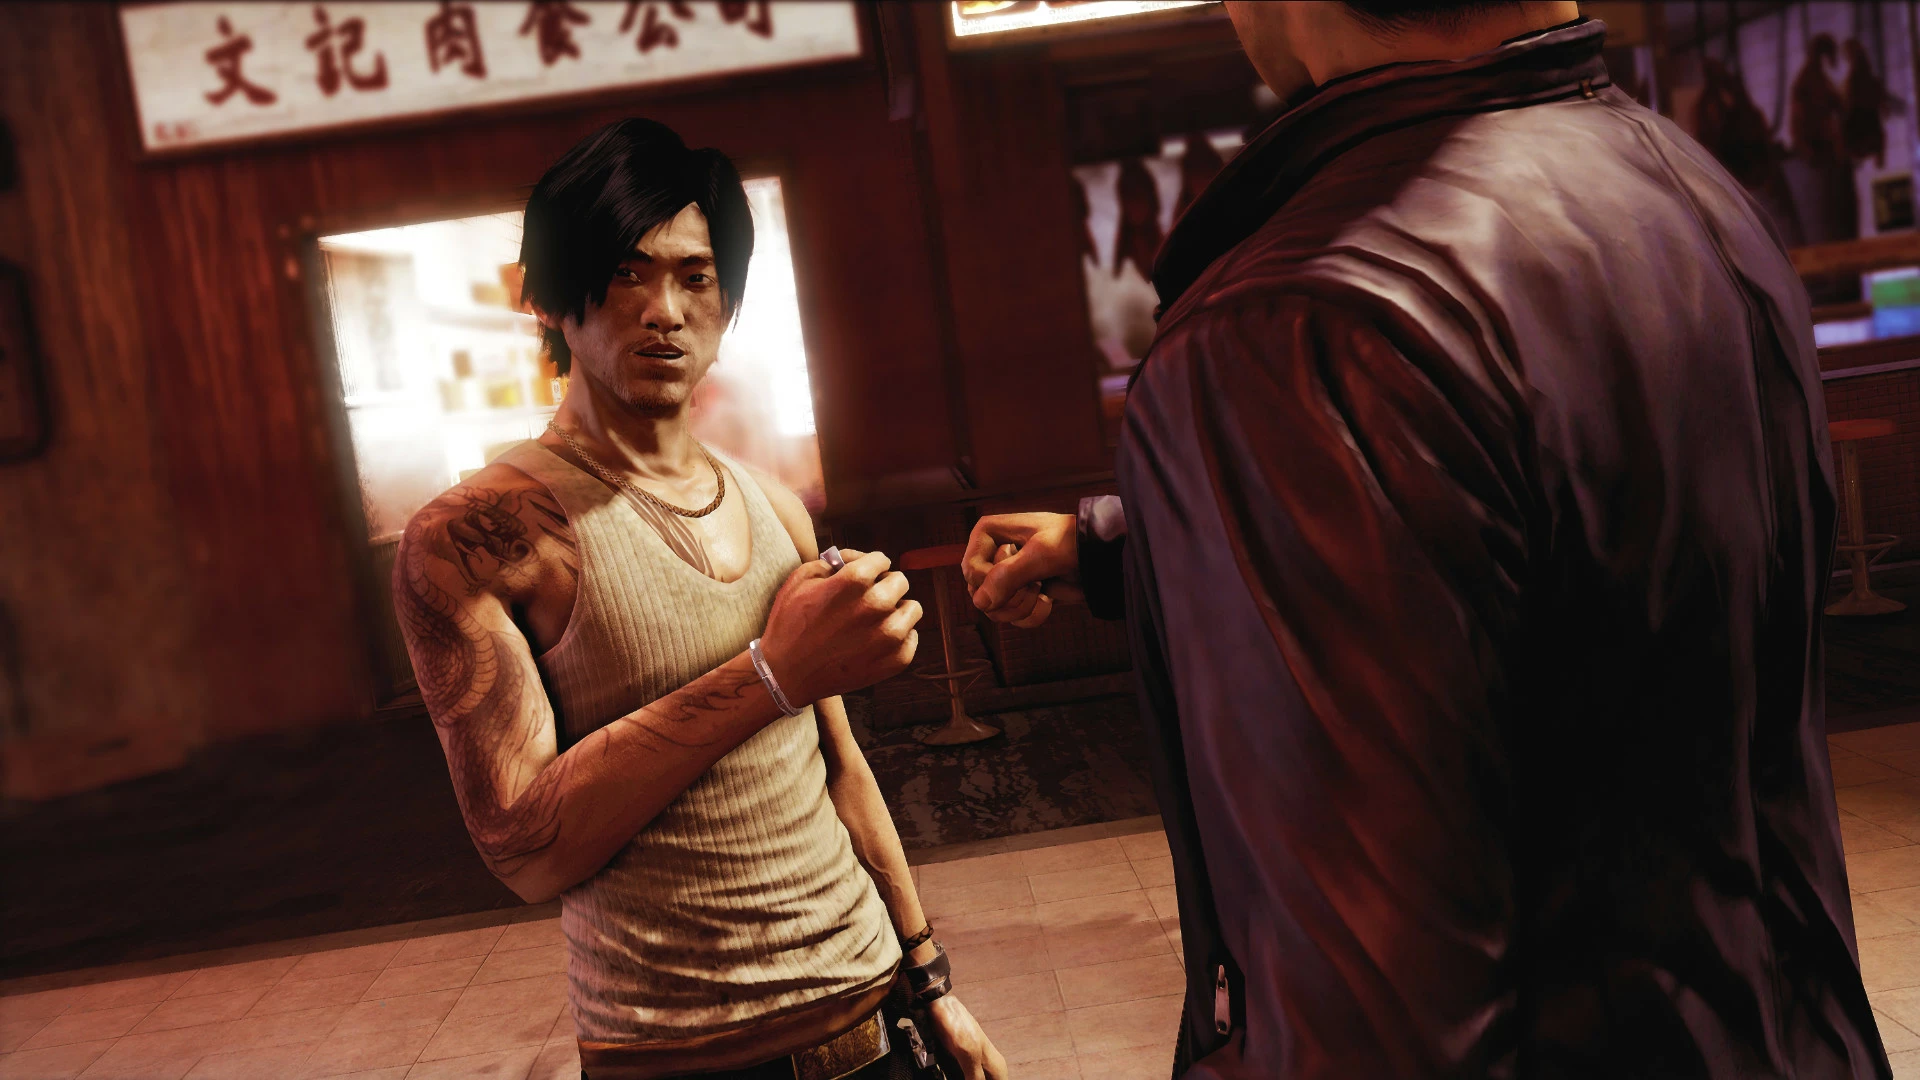 Sleeping Dogs: Definitive Edition] A man who never plays Sleeping Dogs is  never a whole man! This game is pure awesomeness, don't sleep on it like I  did for Wei too long. 